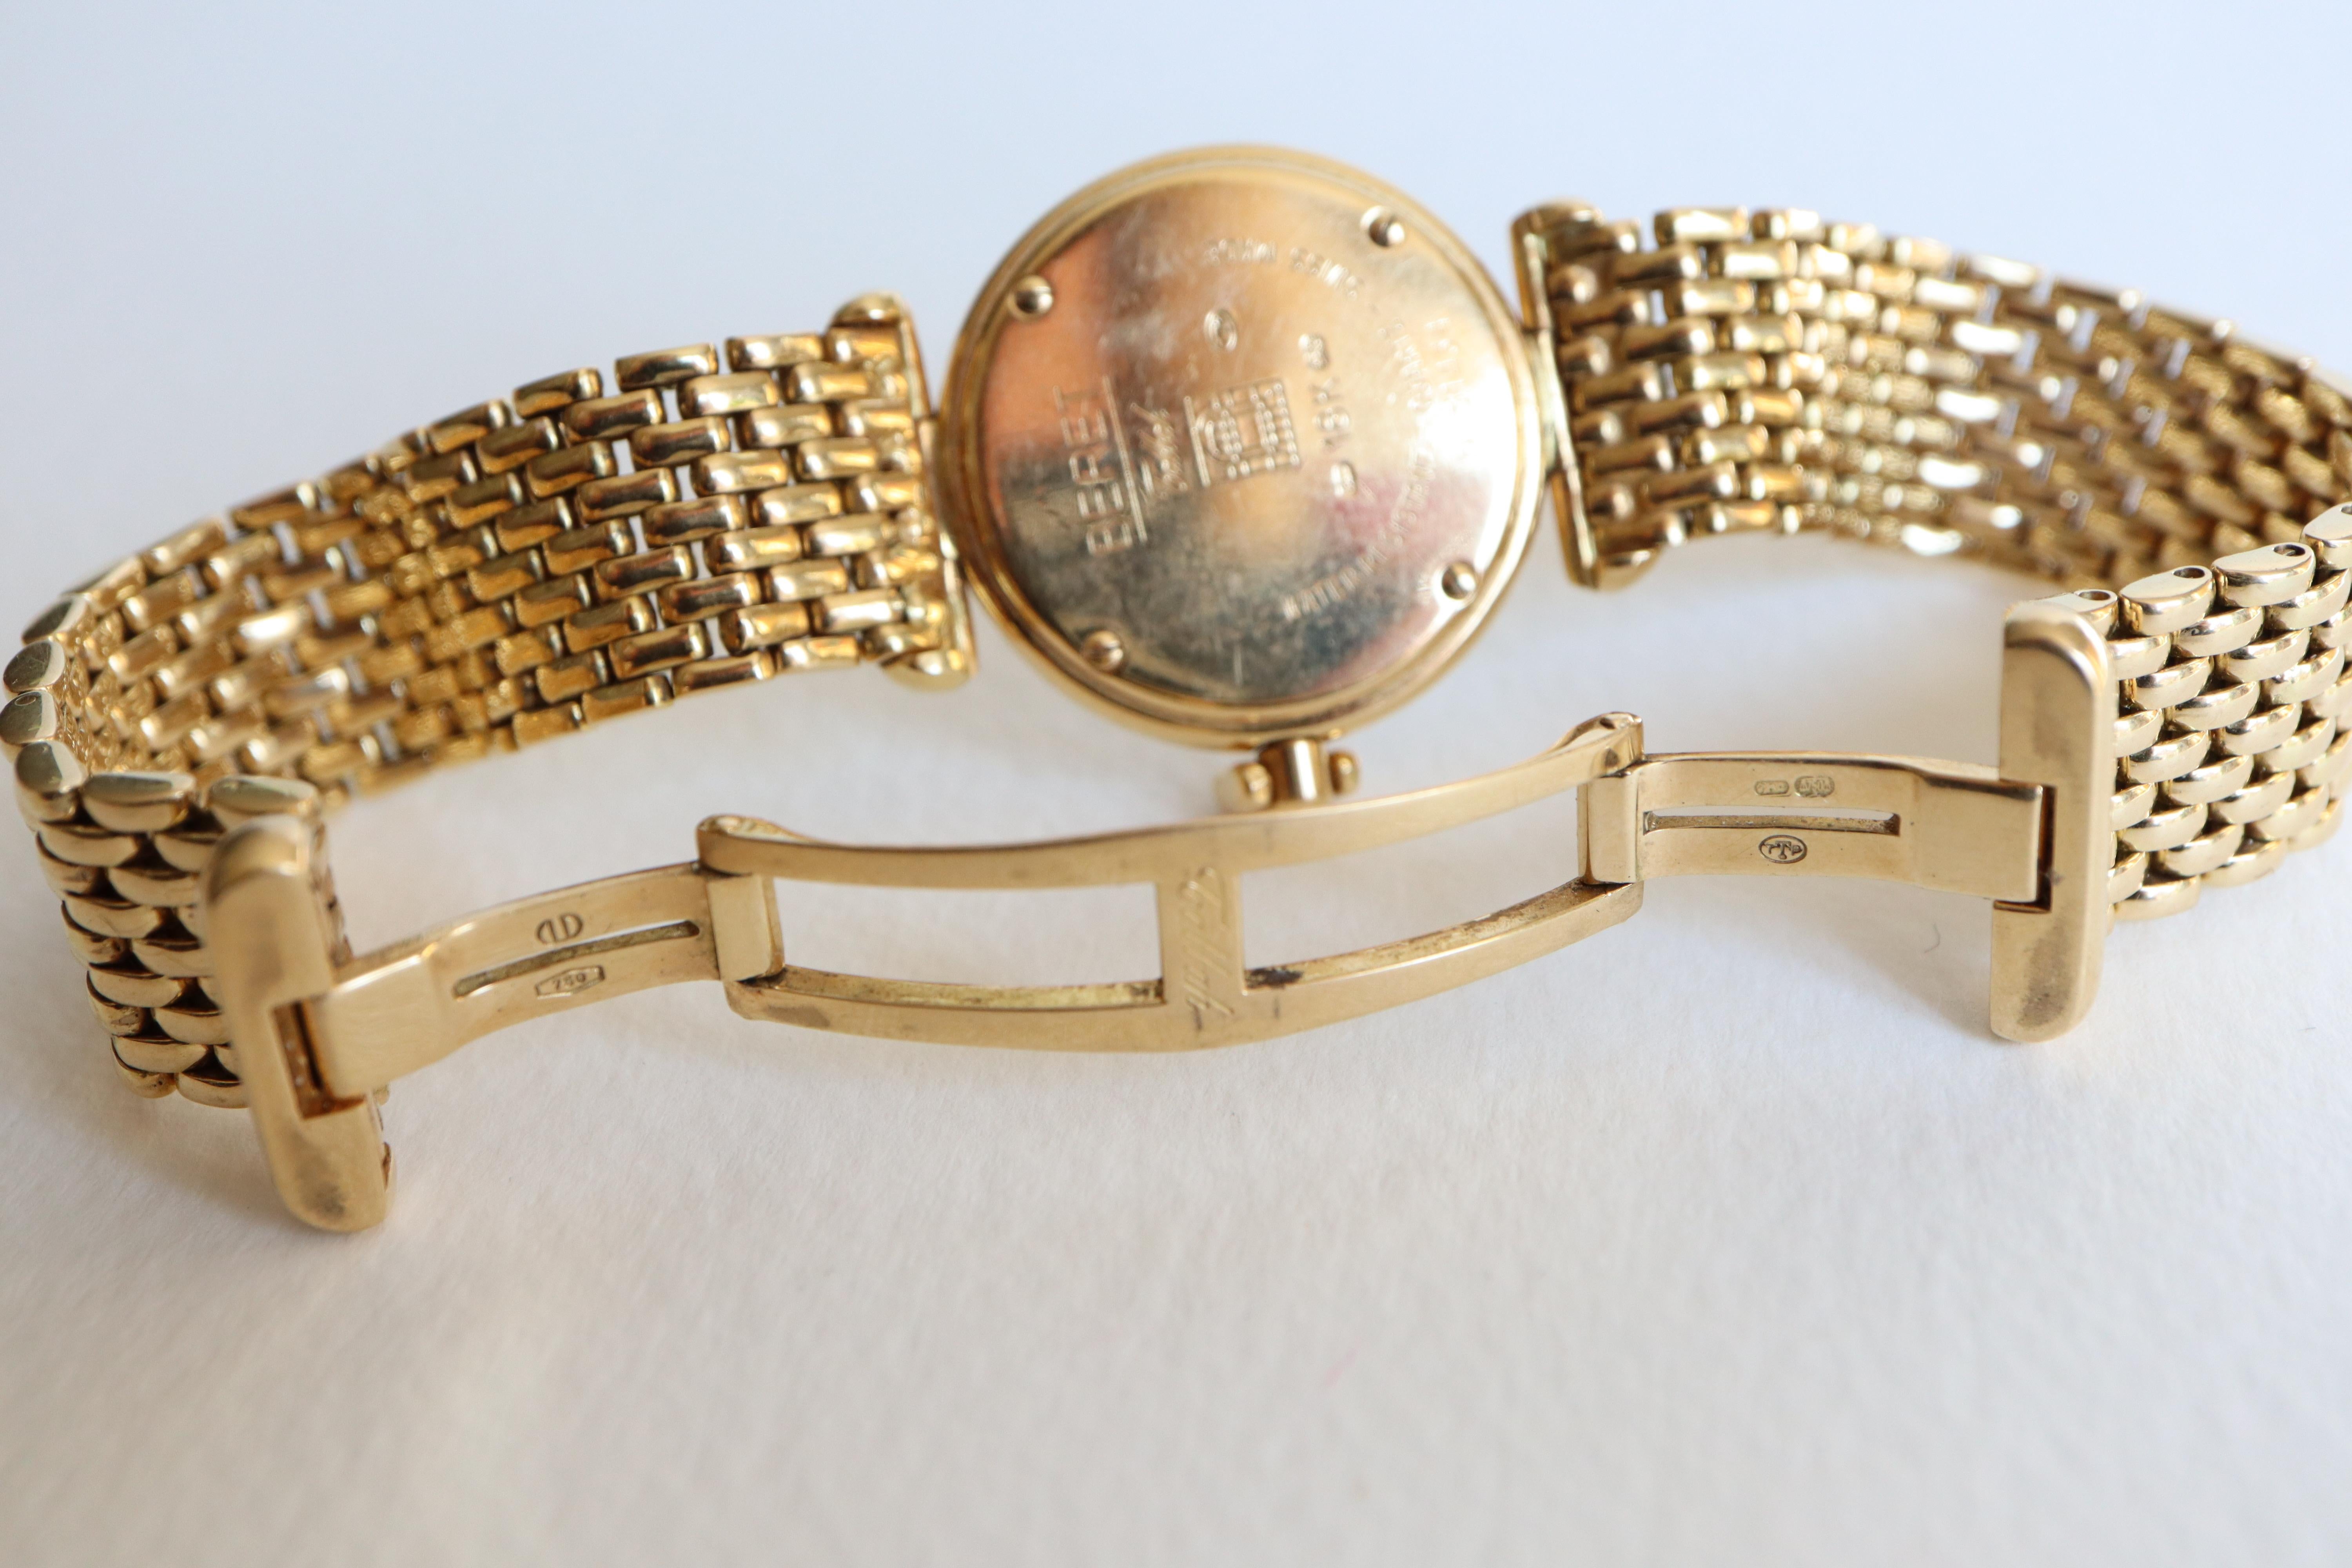 Women's bracelet watch in 18K GOLD and diamonds from TABBAH, Beret model.
Articulated gold bracelet with small links.  138 diamonds for approx. 1,5 to 2 carats
Length: 17cm
Dial length: 3.3 cm bezel diameter 2.5 cm 
Gross weight: 70.3 g
Mechanical